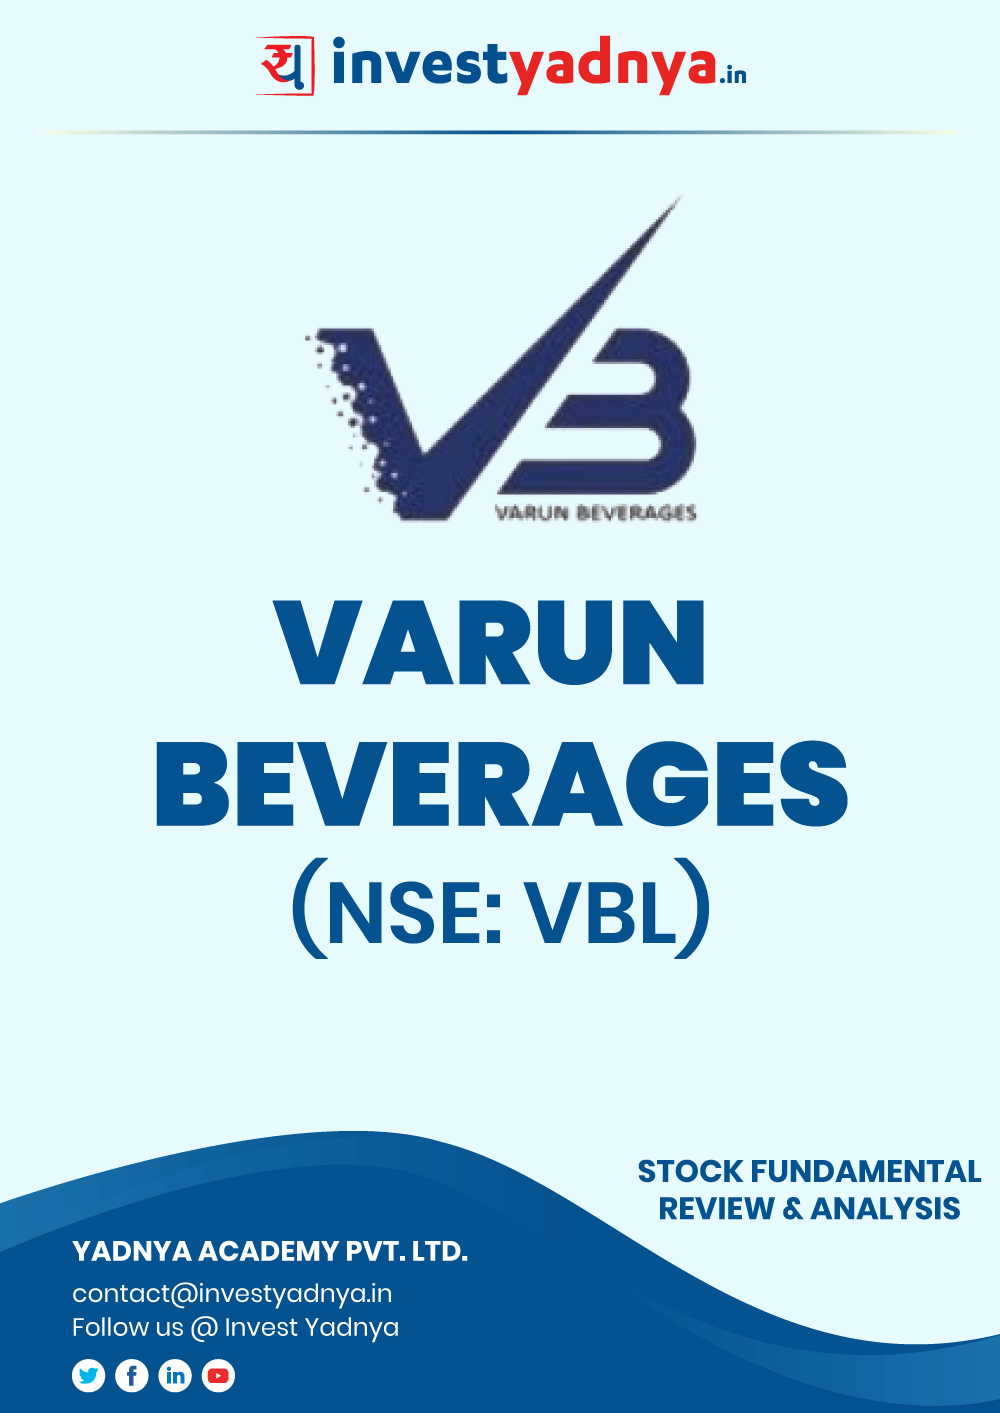 Learn in detail about Varun Beverages LTD in this eBook from Investyadna. Find information about VBL Share Price, Last 10-year trend, Valuation, Fund Growth etc. ✔Finance Books